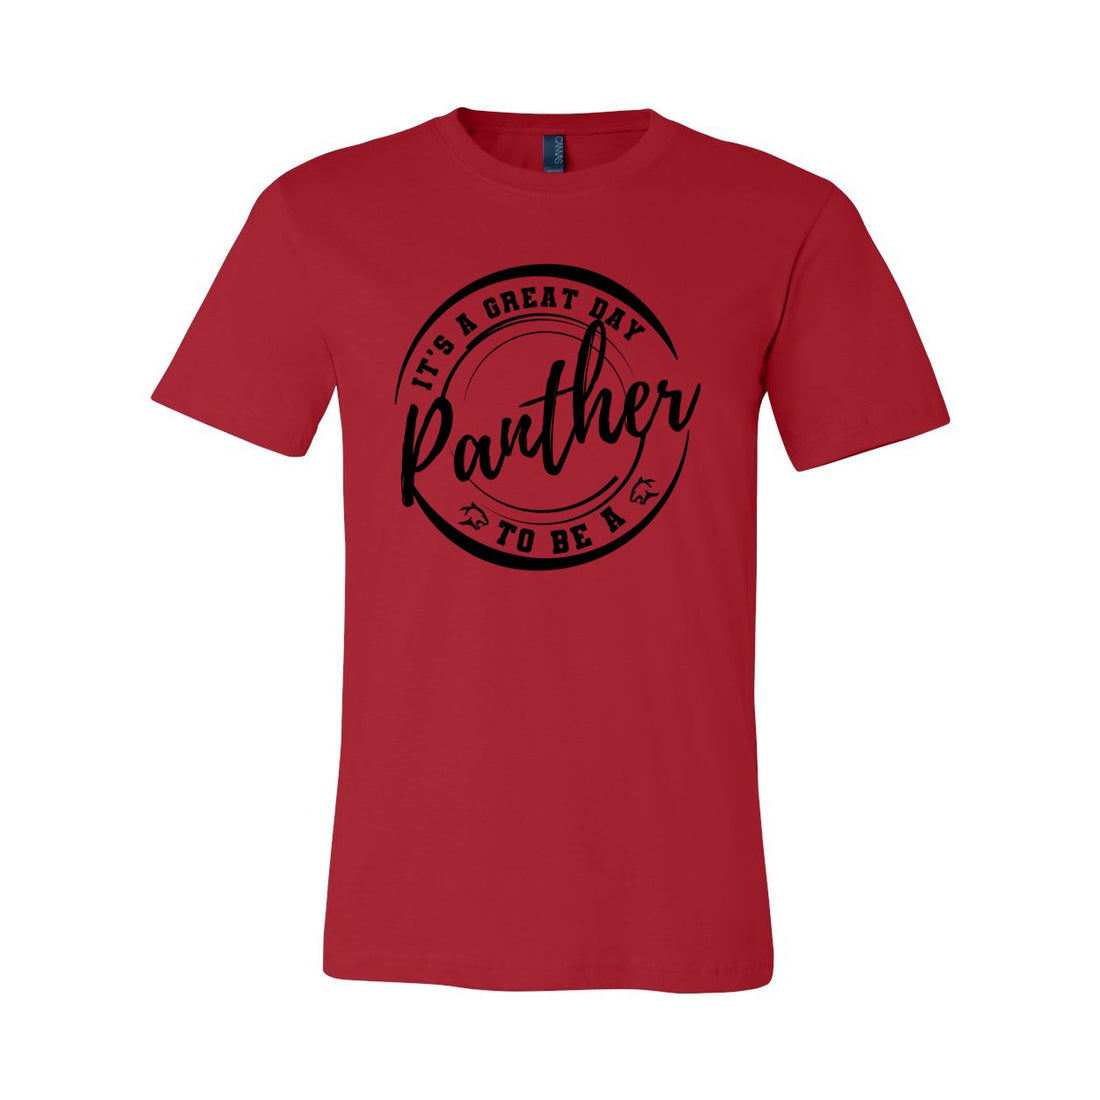 Great Day to be a Panther T-Shirt - T-Shirts - Positively Sassy - Great Day to be a Panther T-Shirt